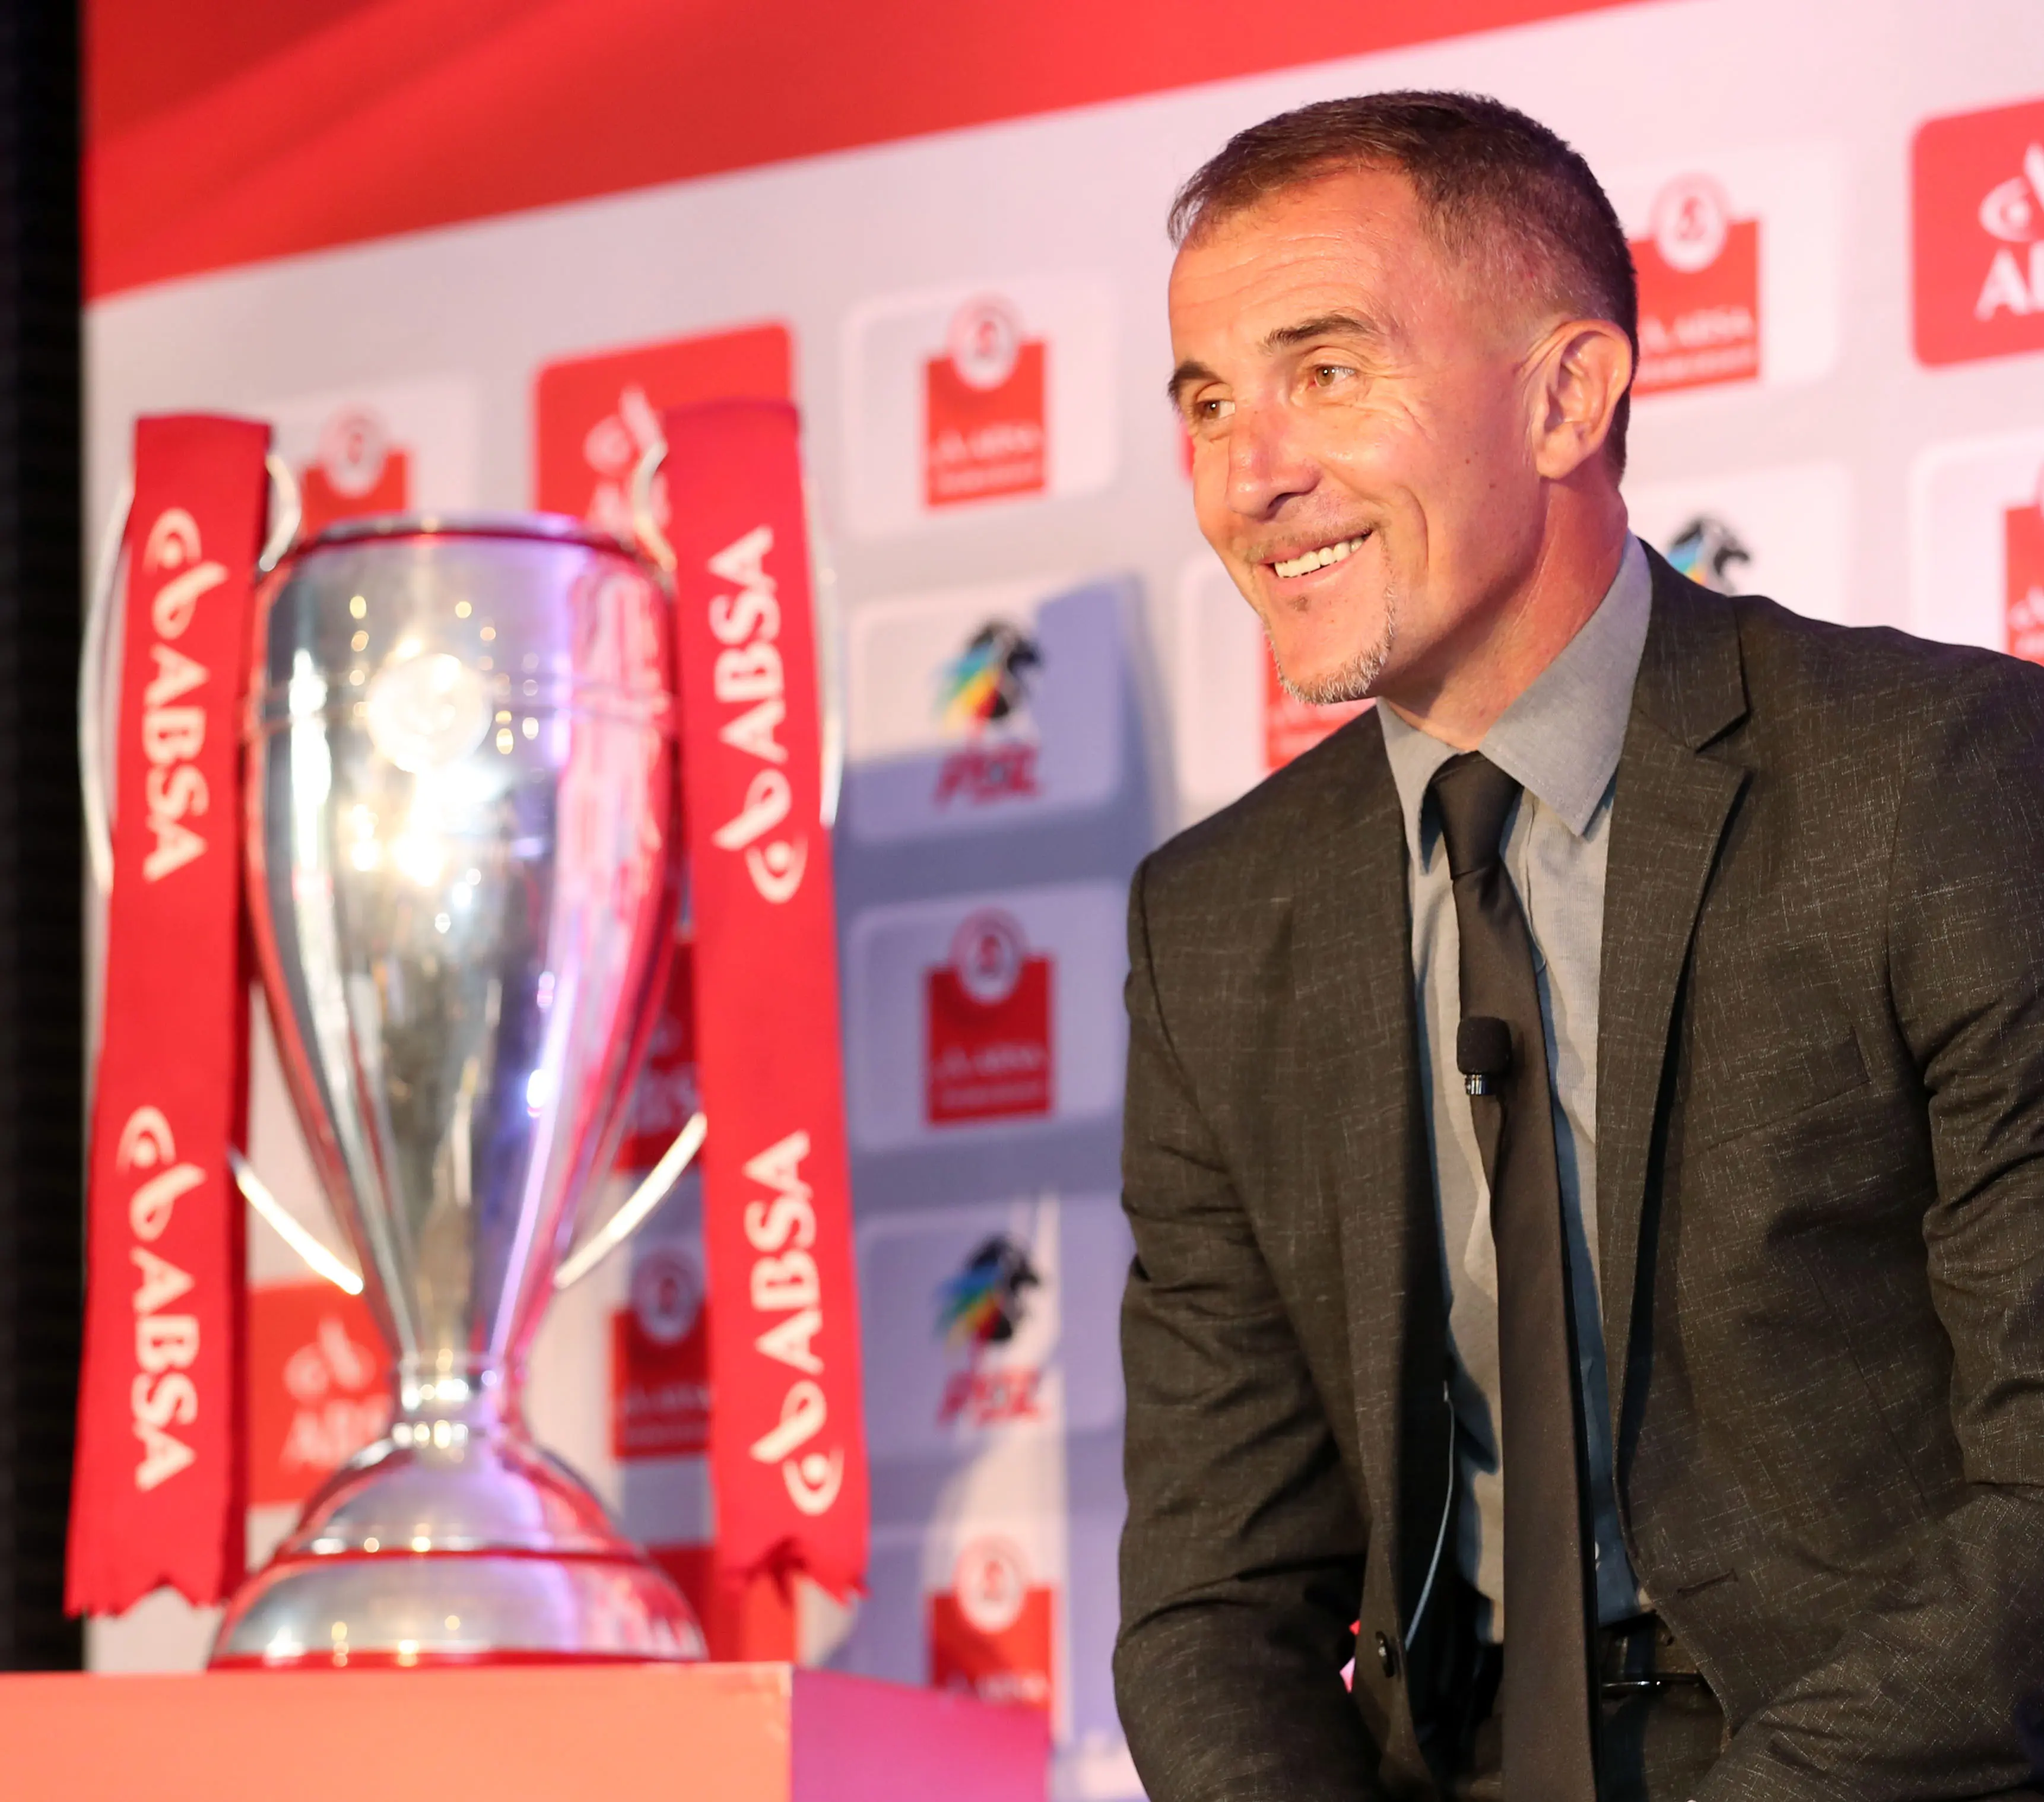 Pirates being back in the Champions League is normal‚ says Sredojevic